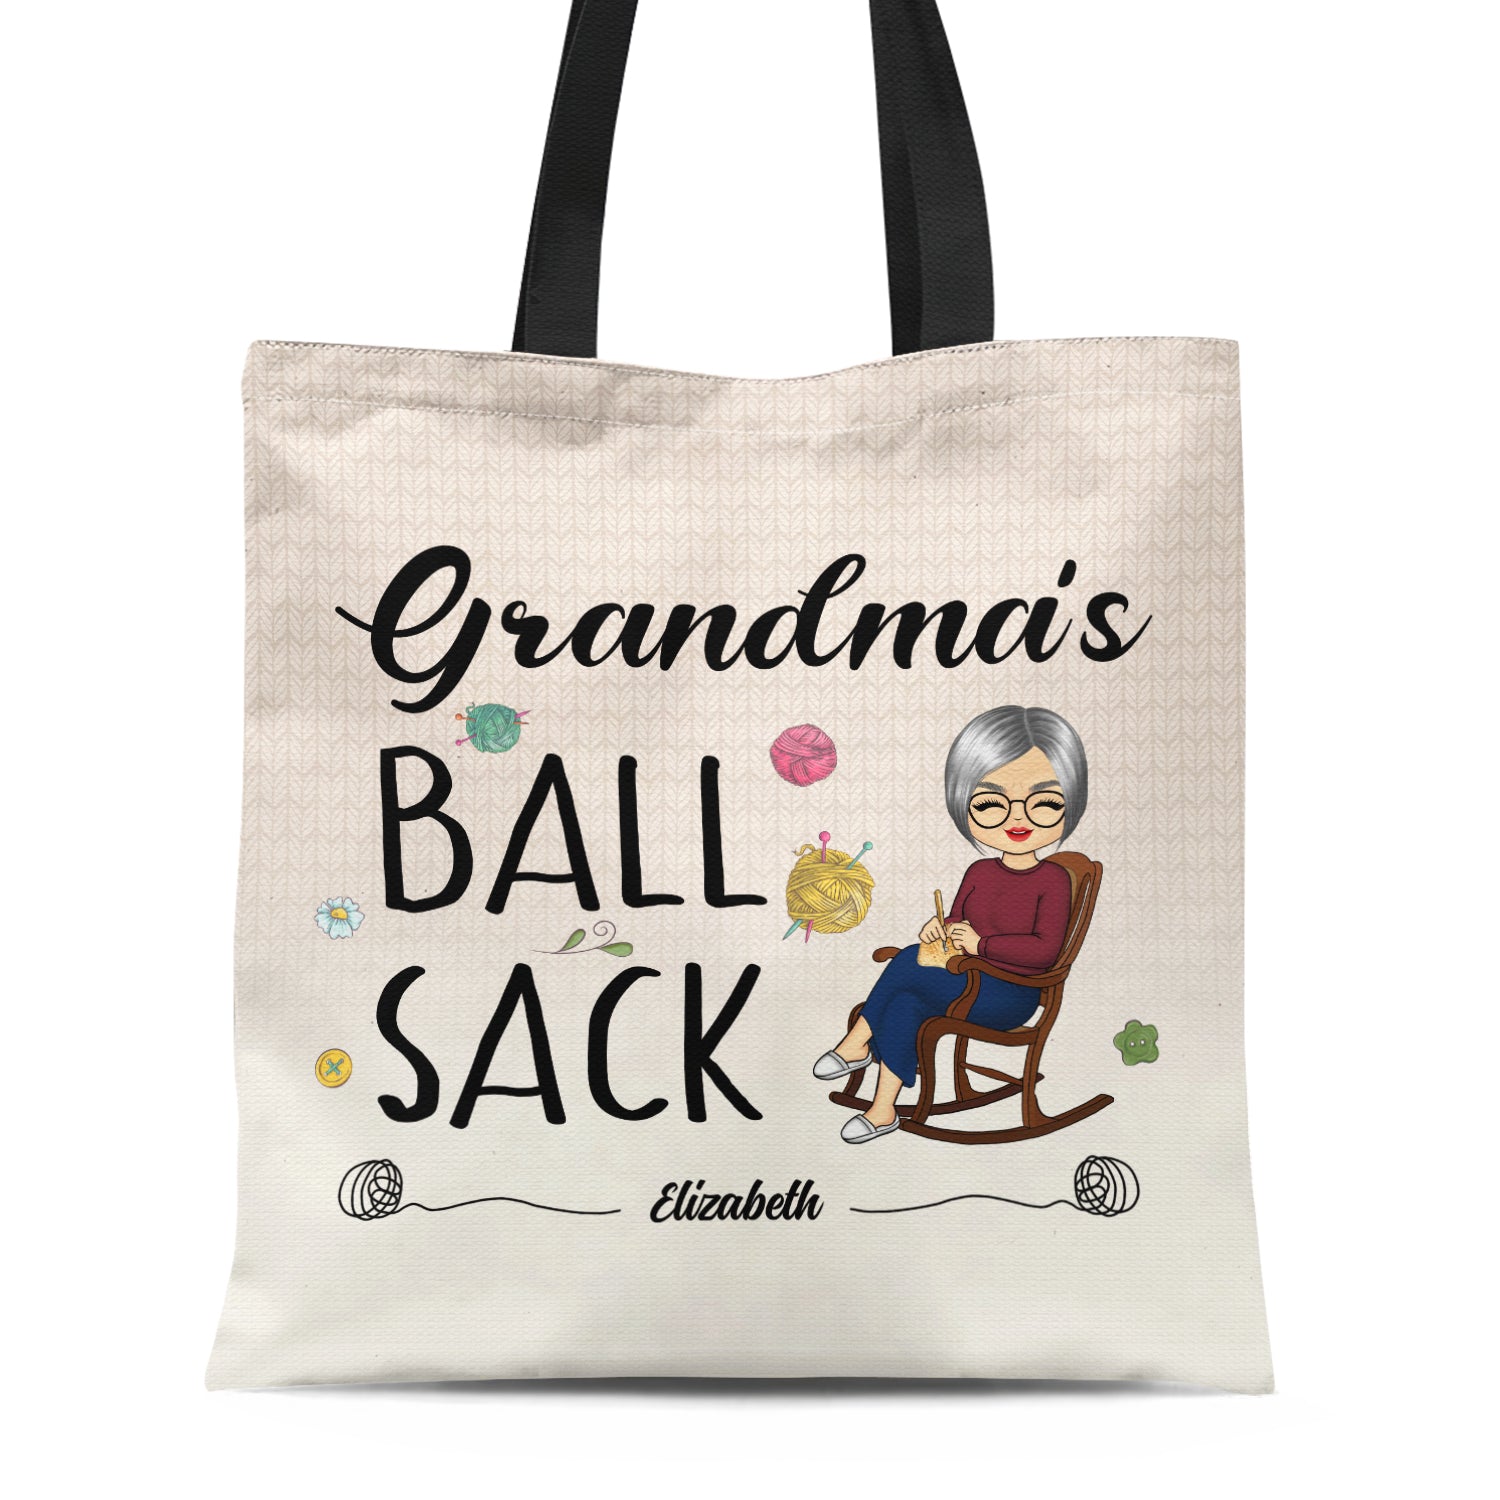 Crocheting Ball Sack - Gift For Grandma And Mother - Personalized Zippered Canvas Bag